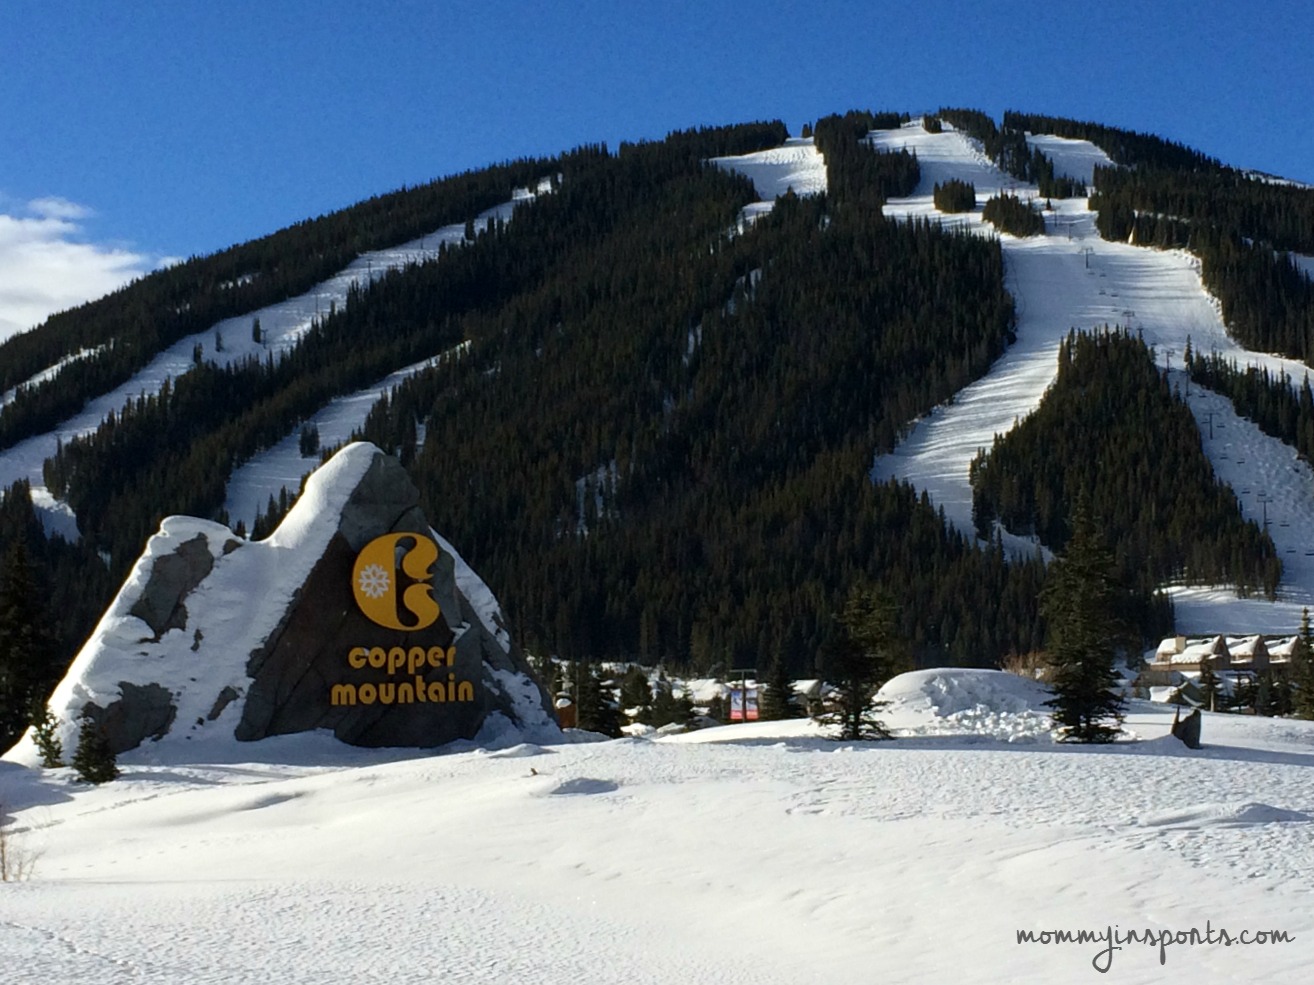 Looking for the perfect family-friendly ski resort? We love Copper Mountain, perfect for all ages when you travel!